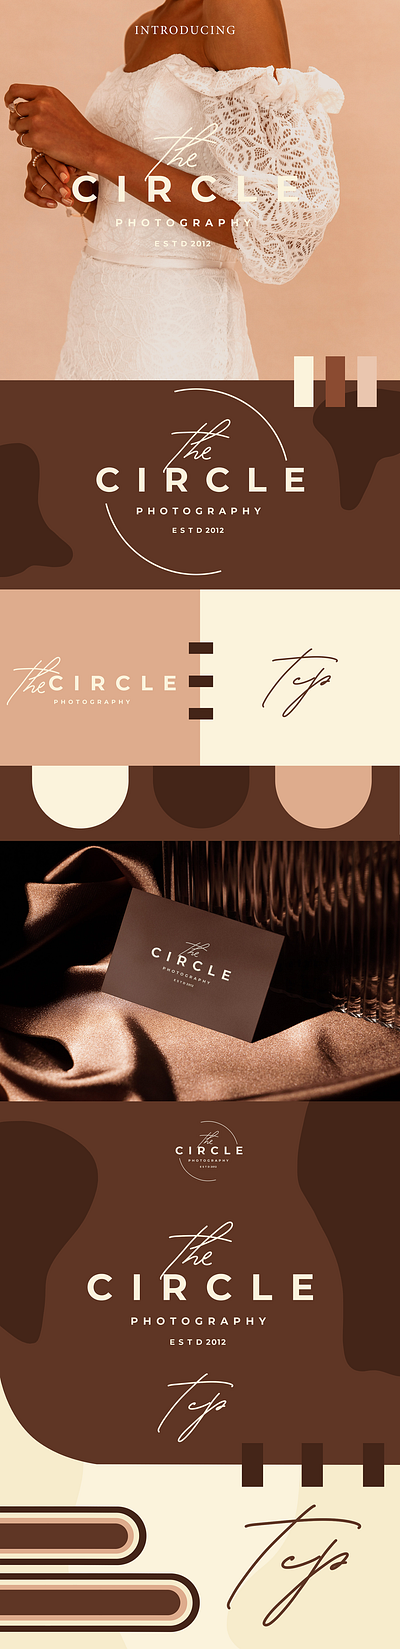 A brand proposed for THE CIRCLE Photography branding graphic design logo photoshop viral